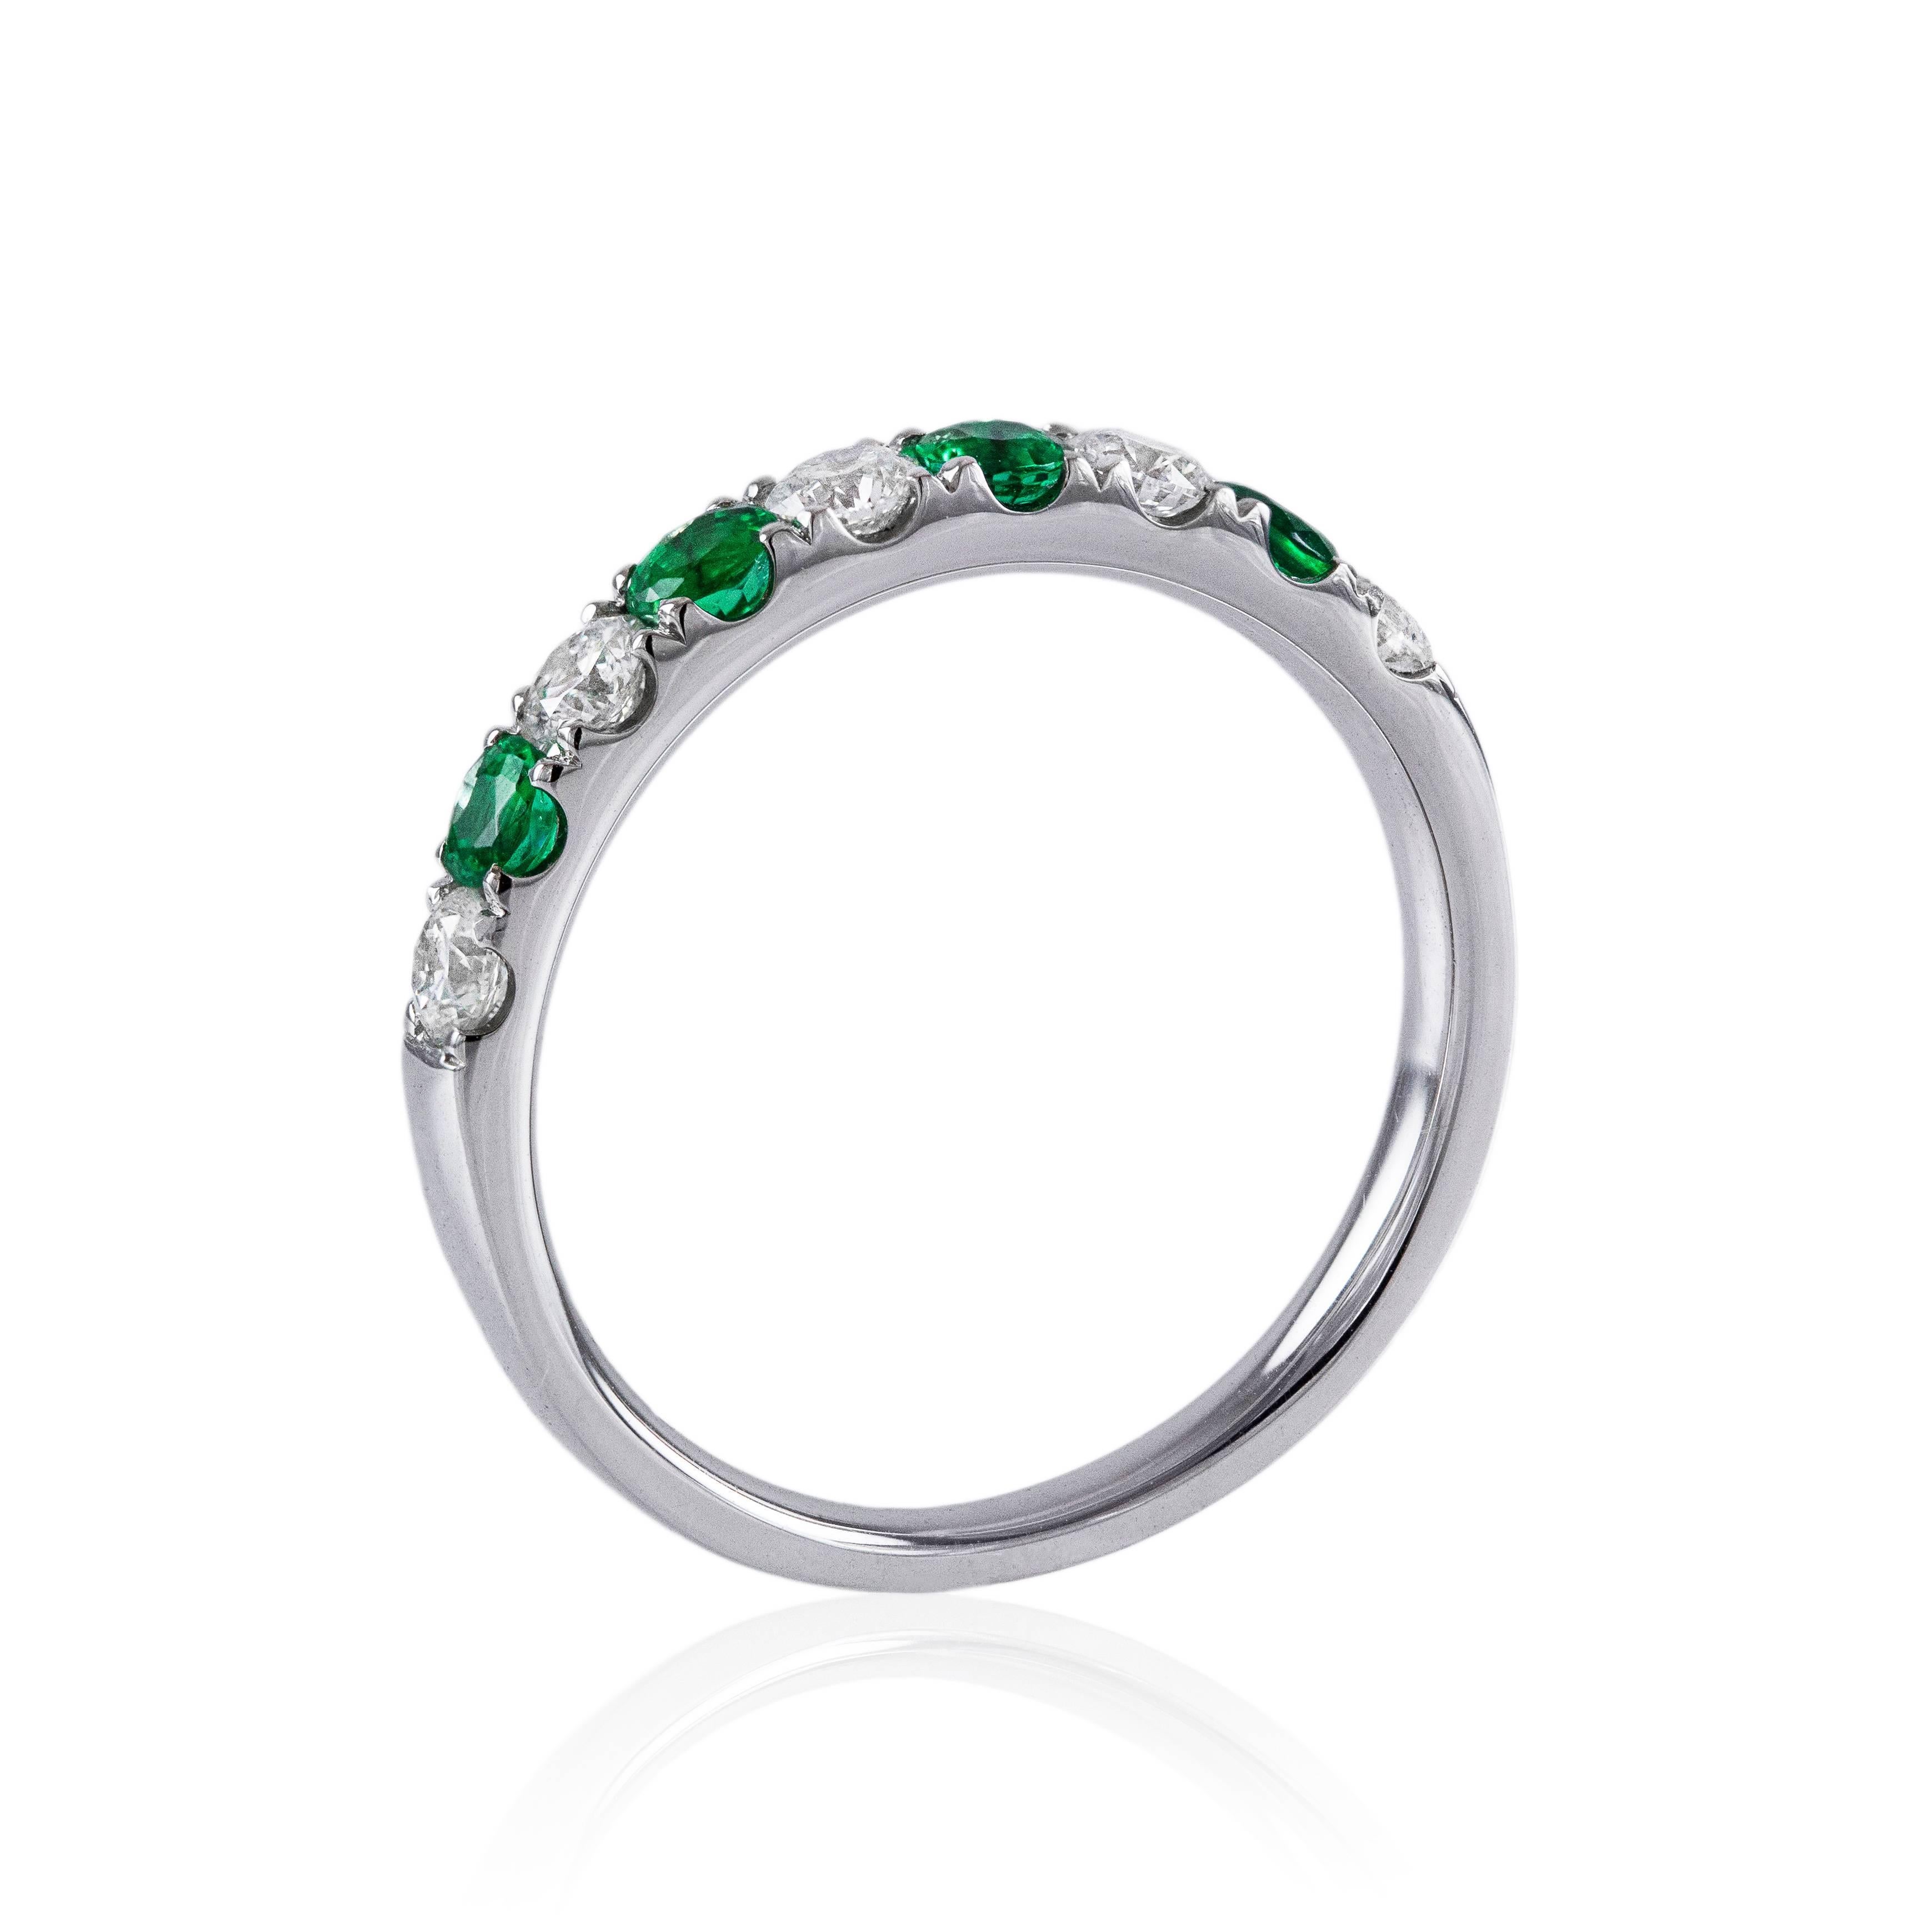 This ring features 4 round cut emeralds weighing 0.36 carats total that alternate with 5 brilliant round diamonds weighing 0.41 carats total. The diamonds are set in 18k white gold. Size 6 1/2 (sizable). A gorgeous piece.